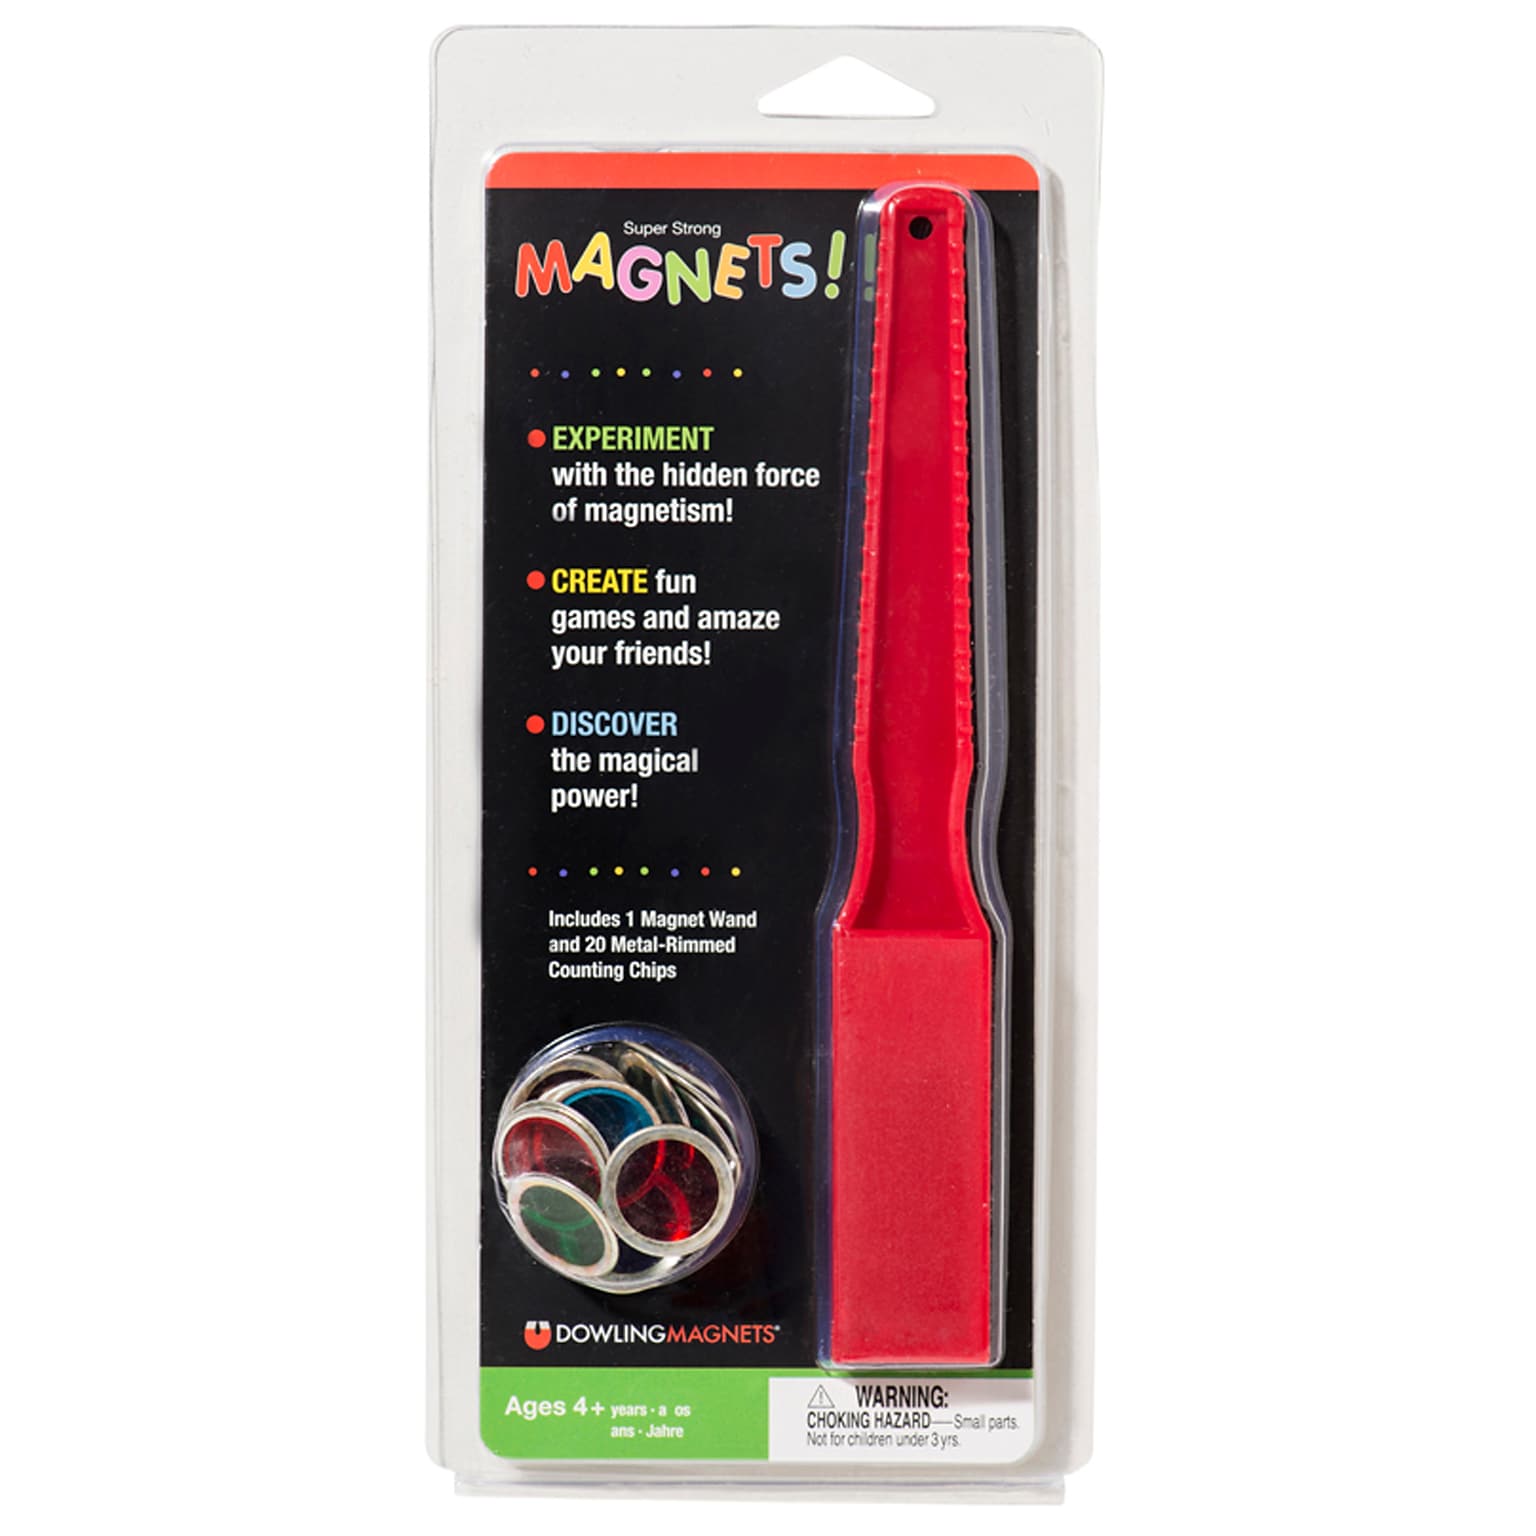 Dowling Magnets Magnet Wand and Counting Chips (DO-736601)